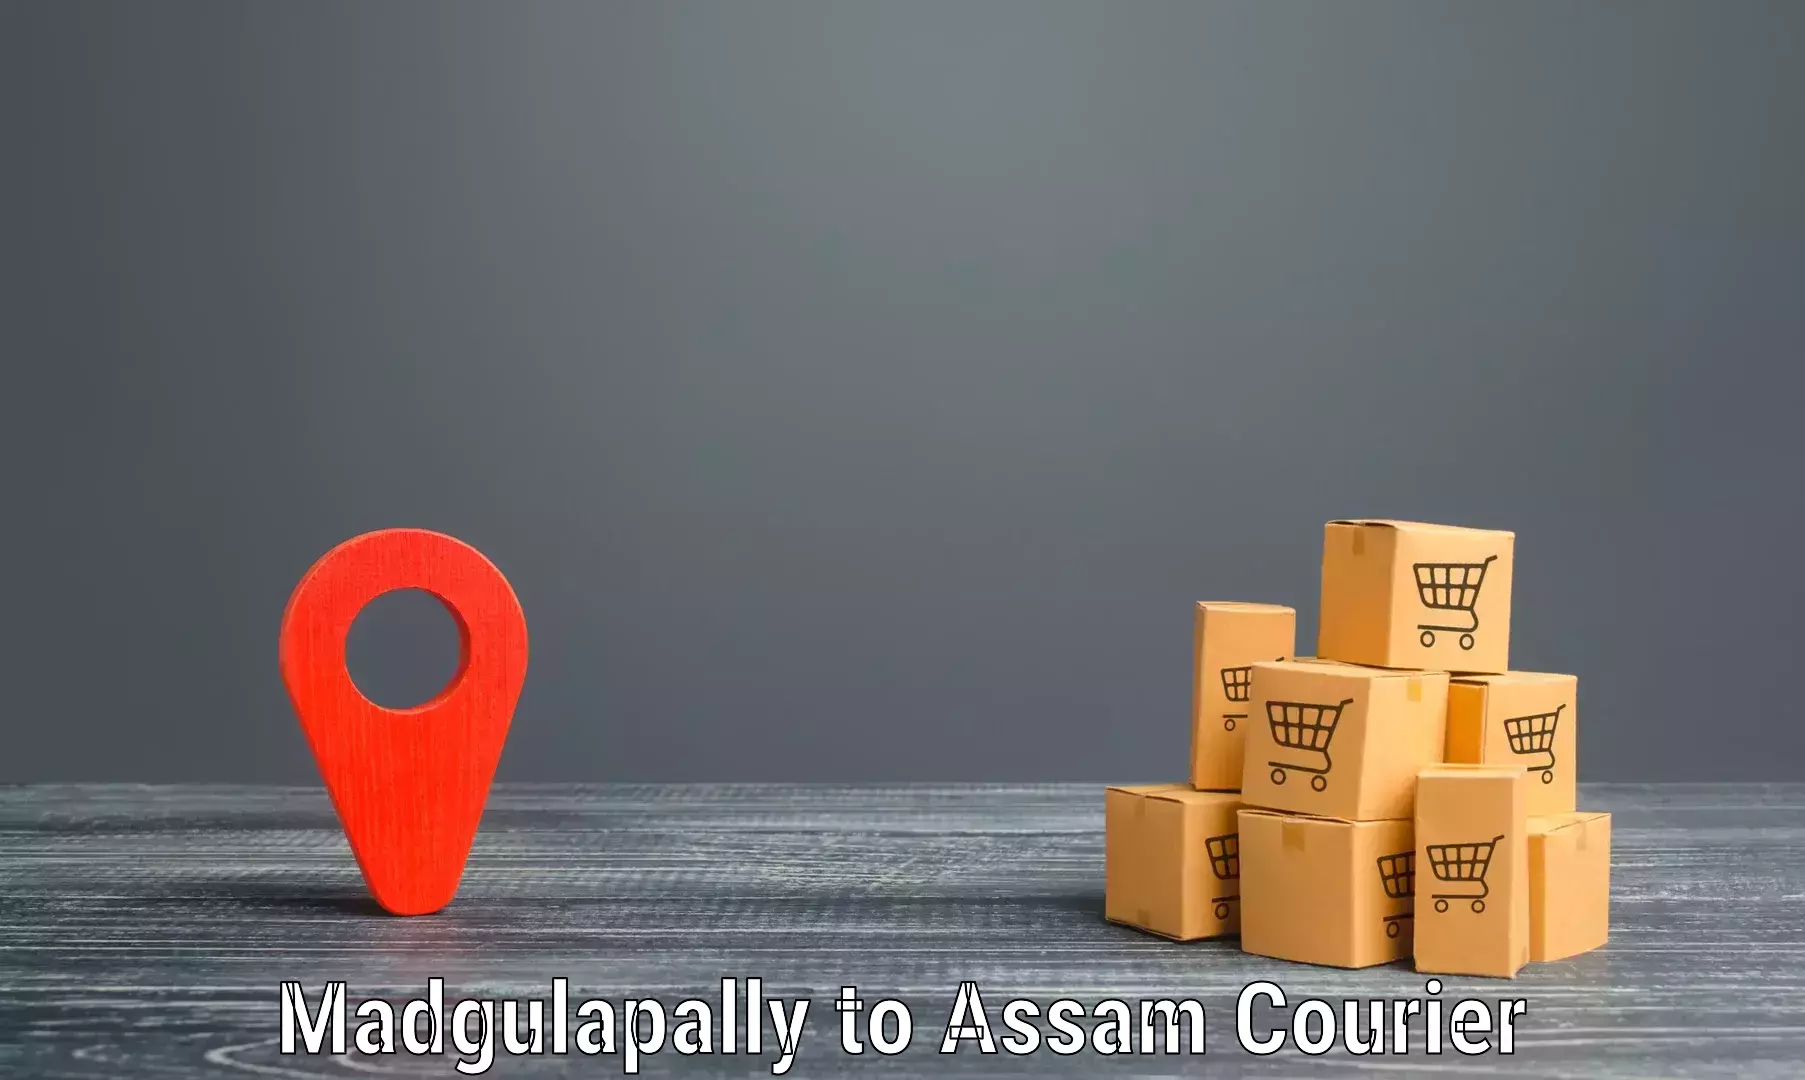 Global courier networks Madgulapally to Lala Assam